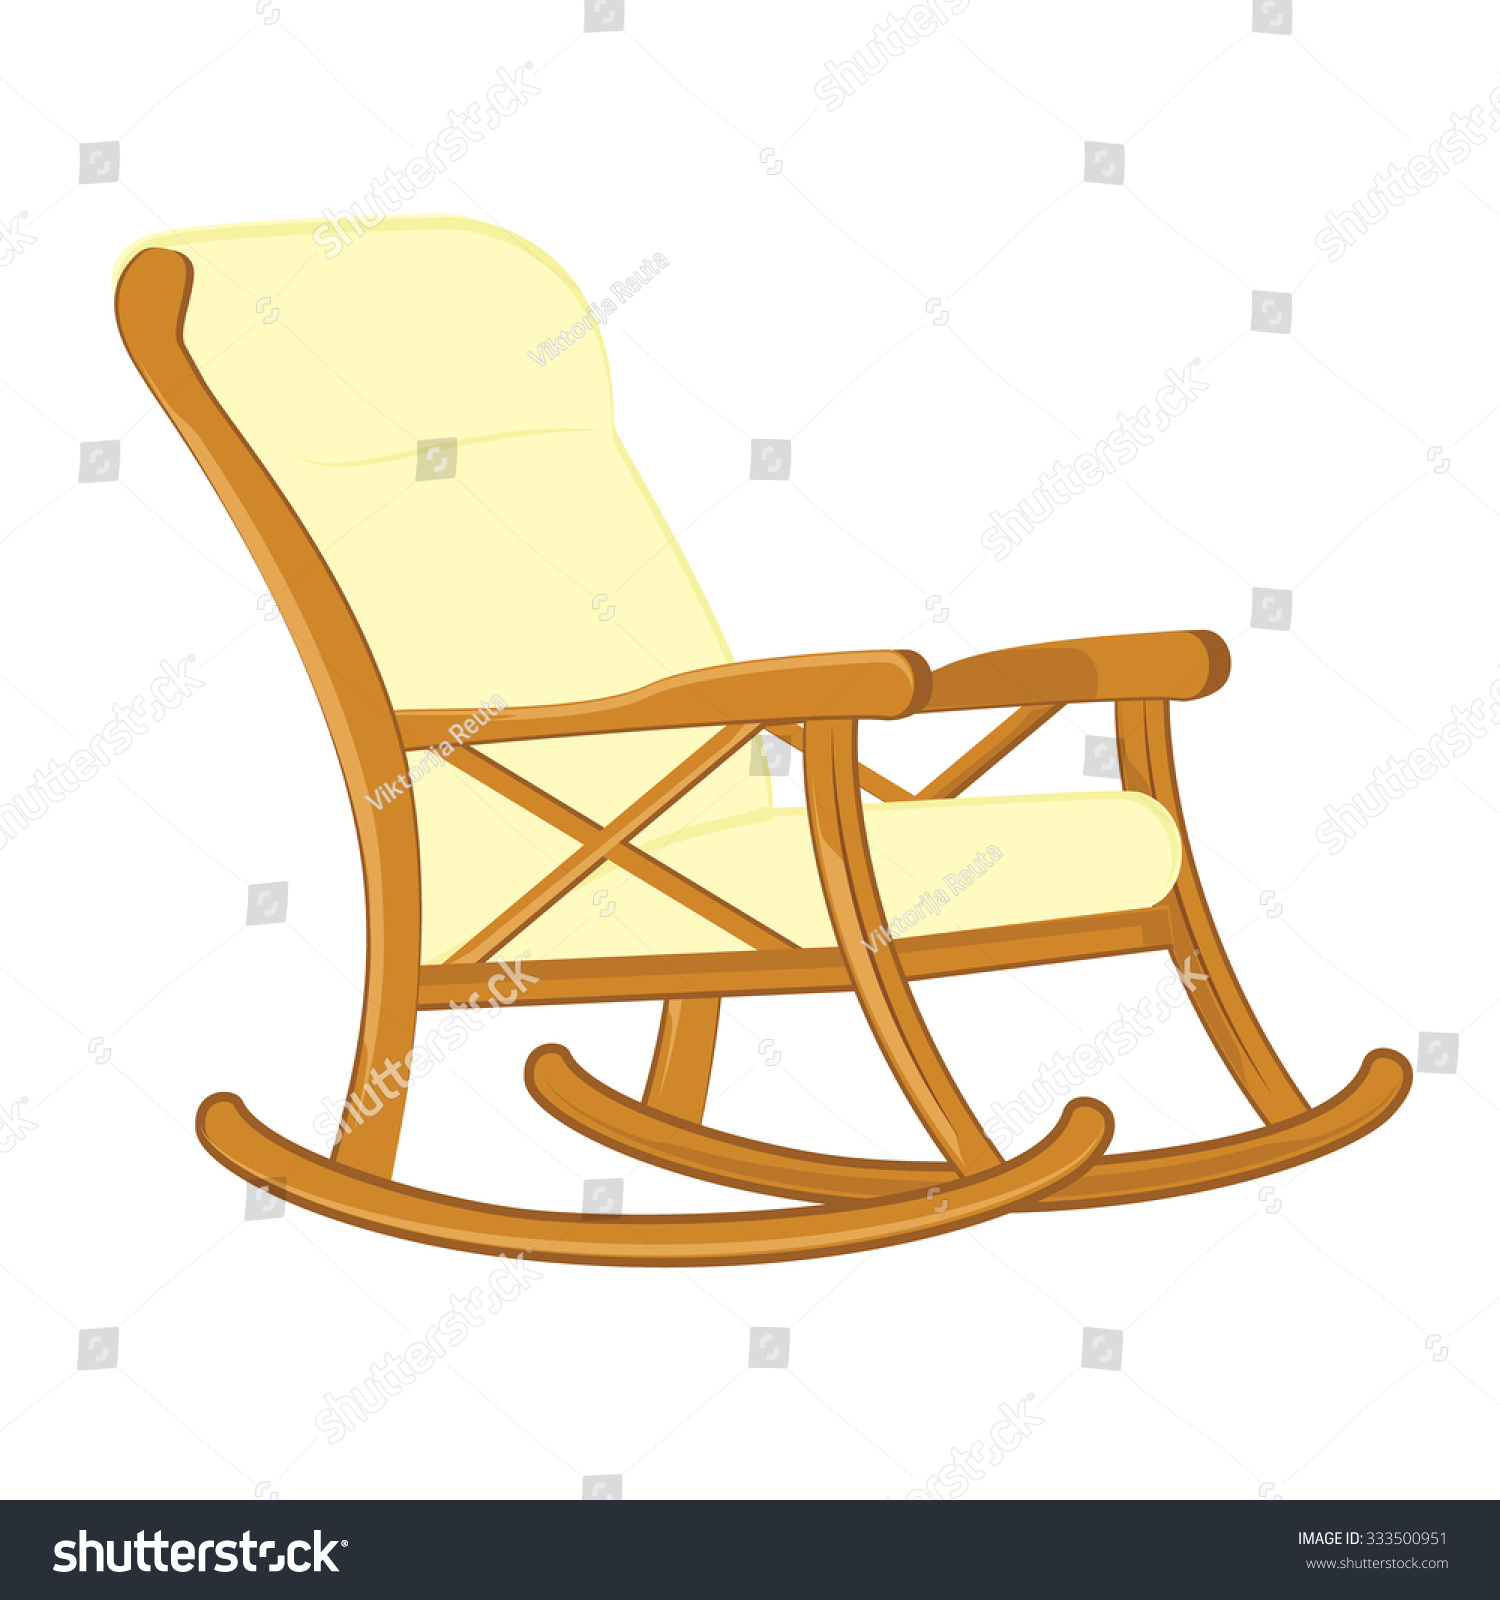 Vector Illustration Wooden Rocking Chair Soft Stock Vector 333500951